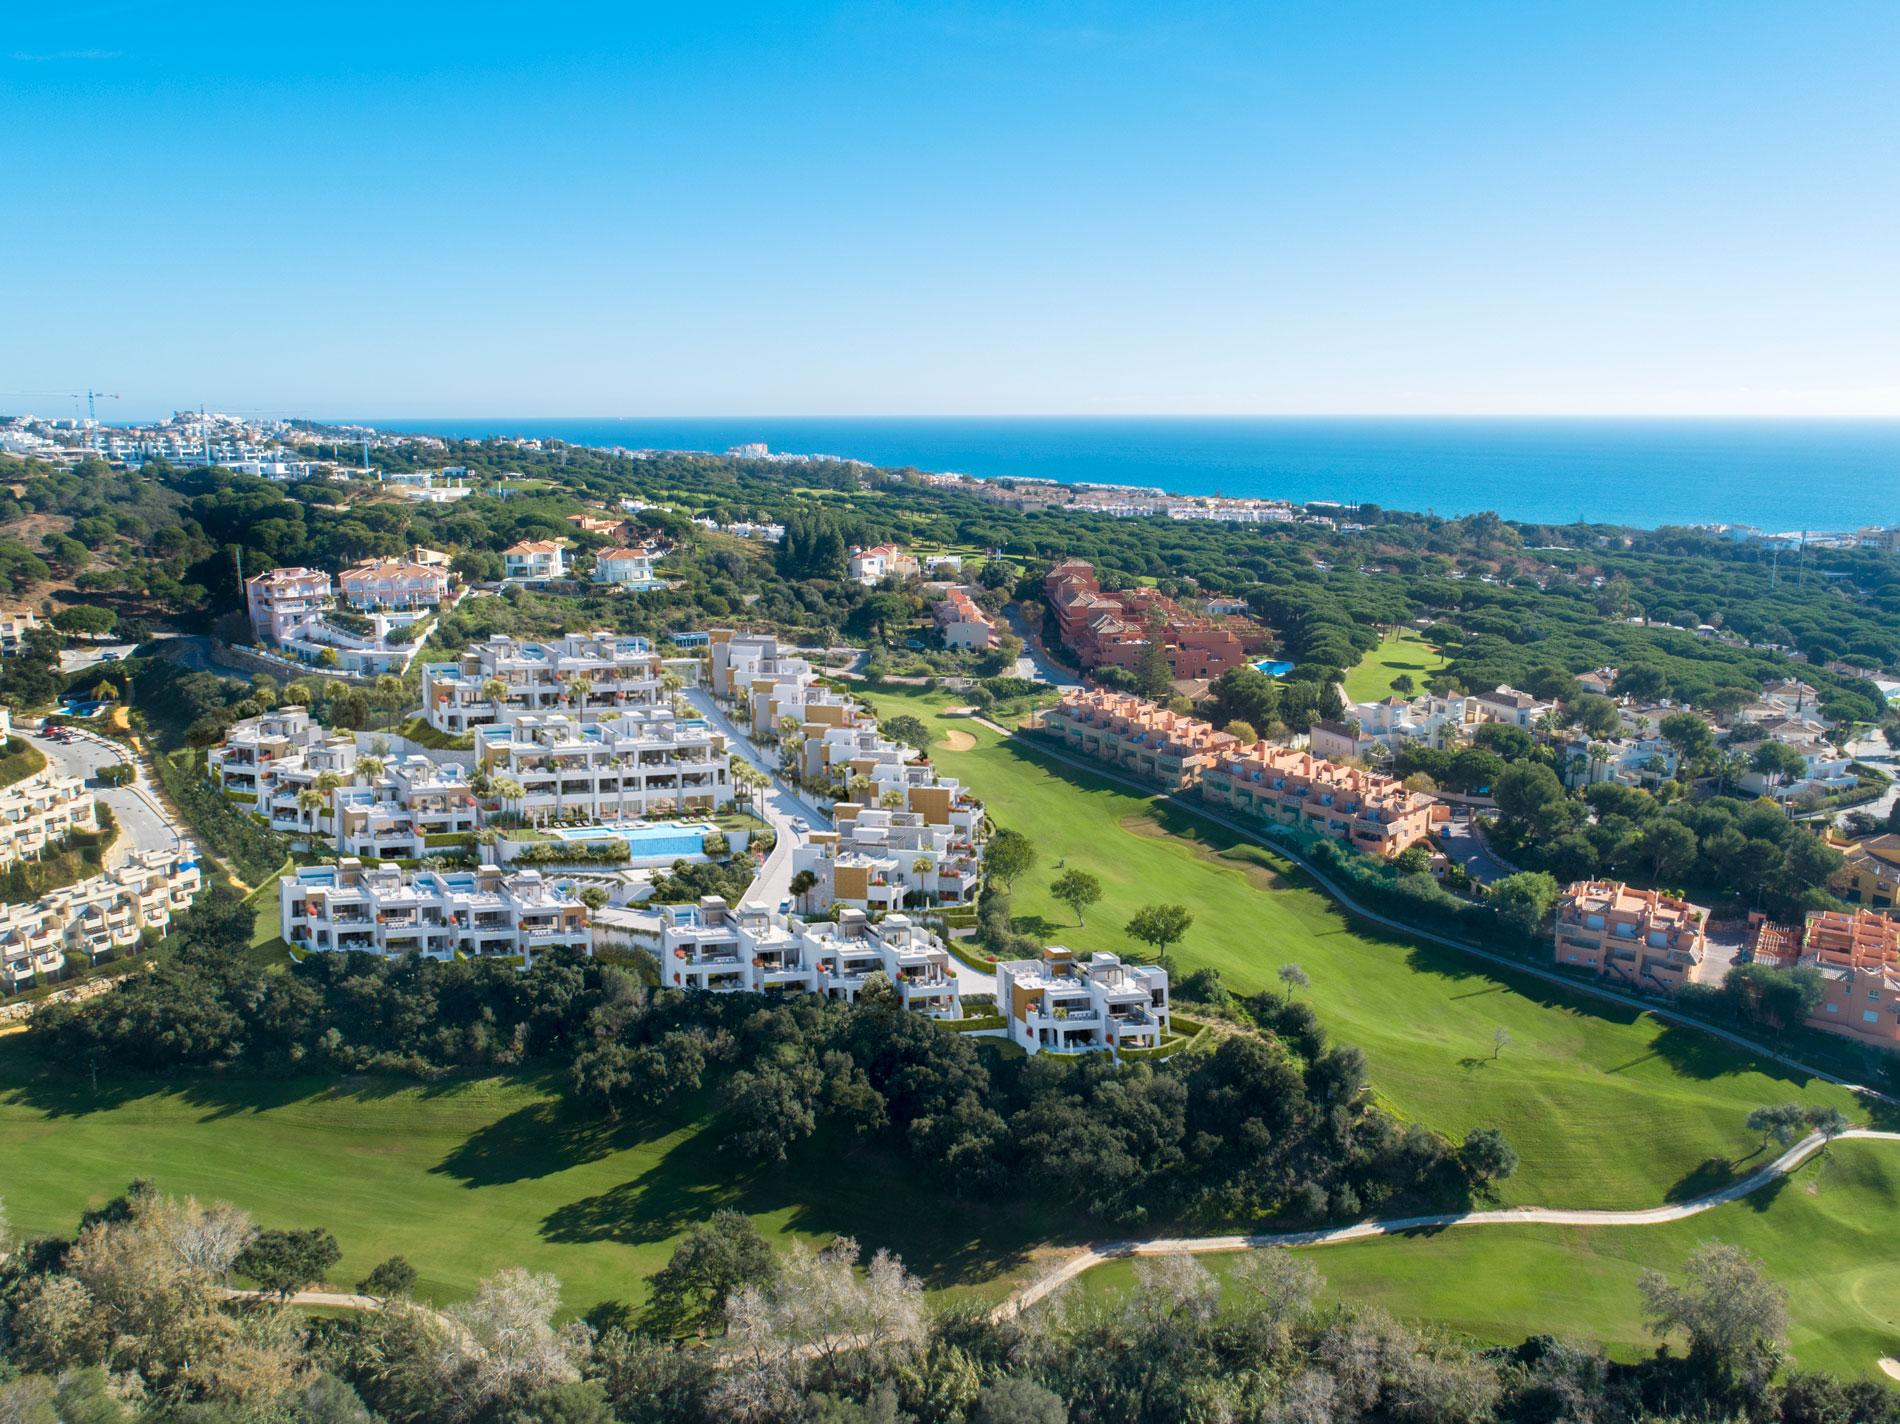 2, 3 and 4 bedrooms apartments on the front line of the Cabopino Golf Coursein Marbella. Designed to offer you all the luxury of a resort inside your ownhome.